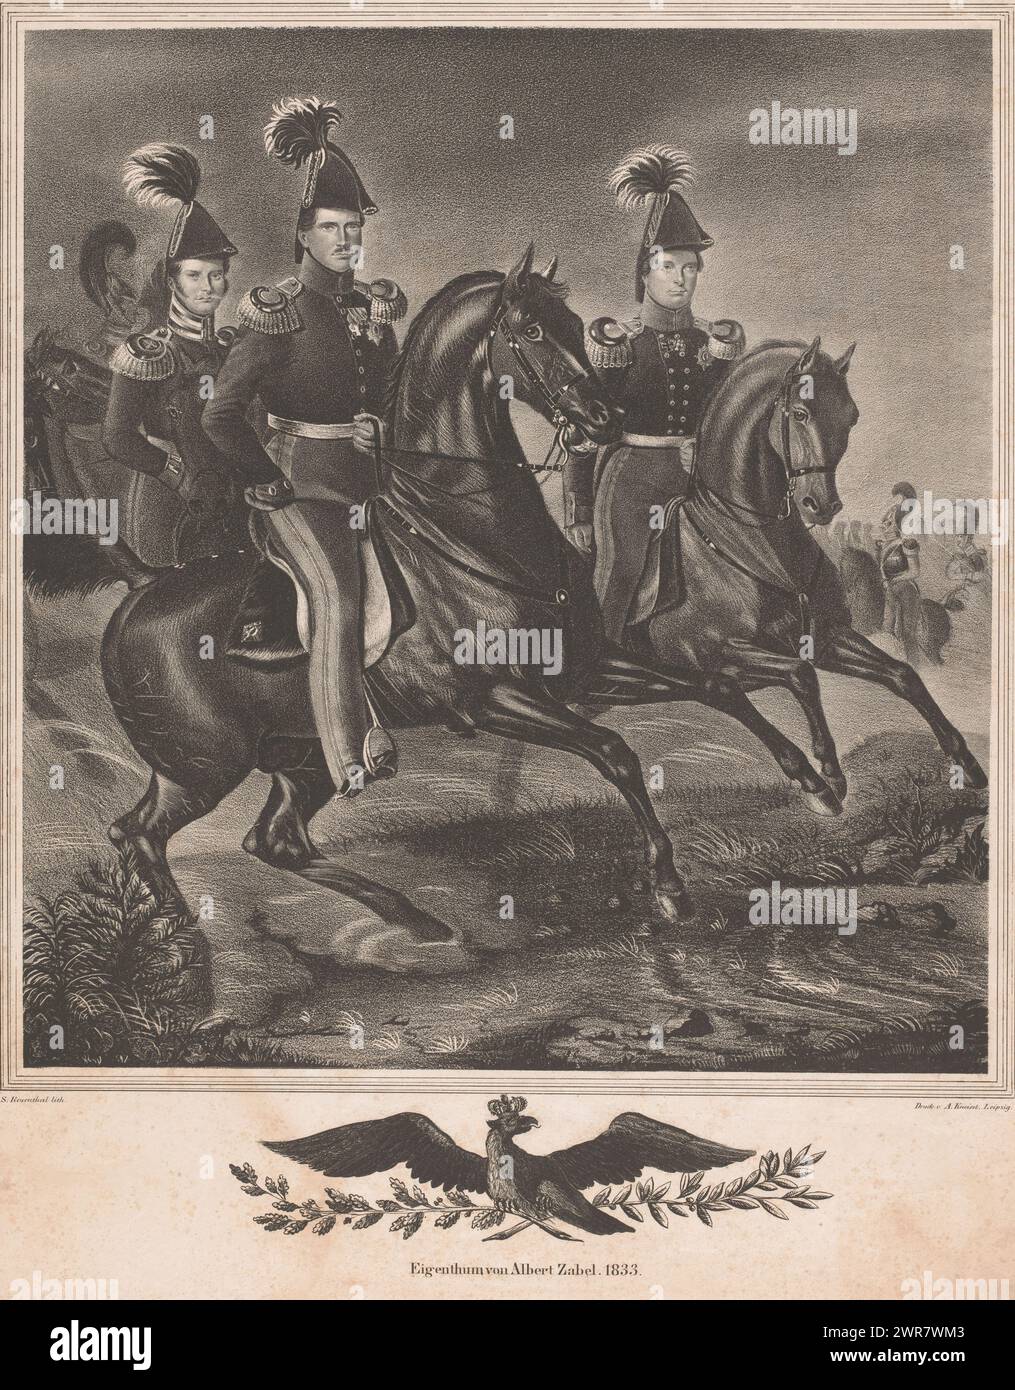 Friedrich Wilhelm III of Prussia with his sons on horseback, Friedrich Wilhelm III of Prussia on horseback. Behind him are his sons Frederik Willem and Wilhelm. In the background riders on horseback. Below the image a crowned eagle on olive branch and oak branch., print maker: S. Rosenthal, printer: August Kneisel, Leipzig, 1833, paper, height 537 mm × width 411 mm, print Stock Photo